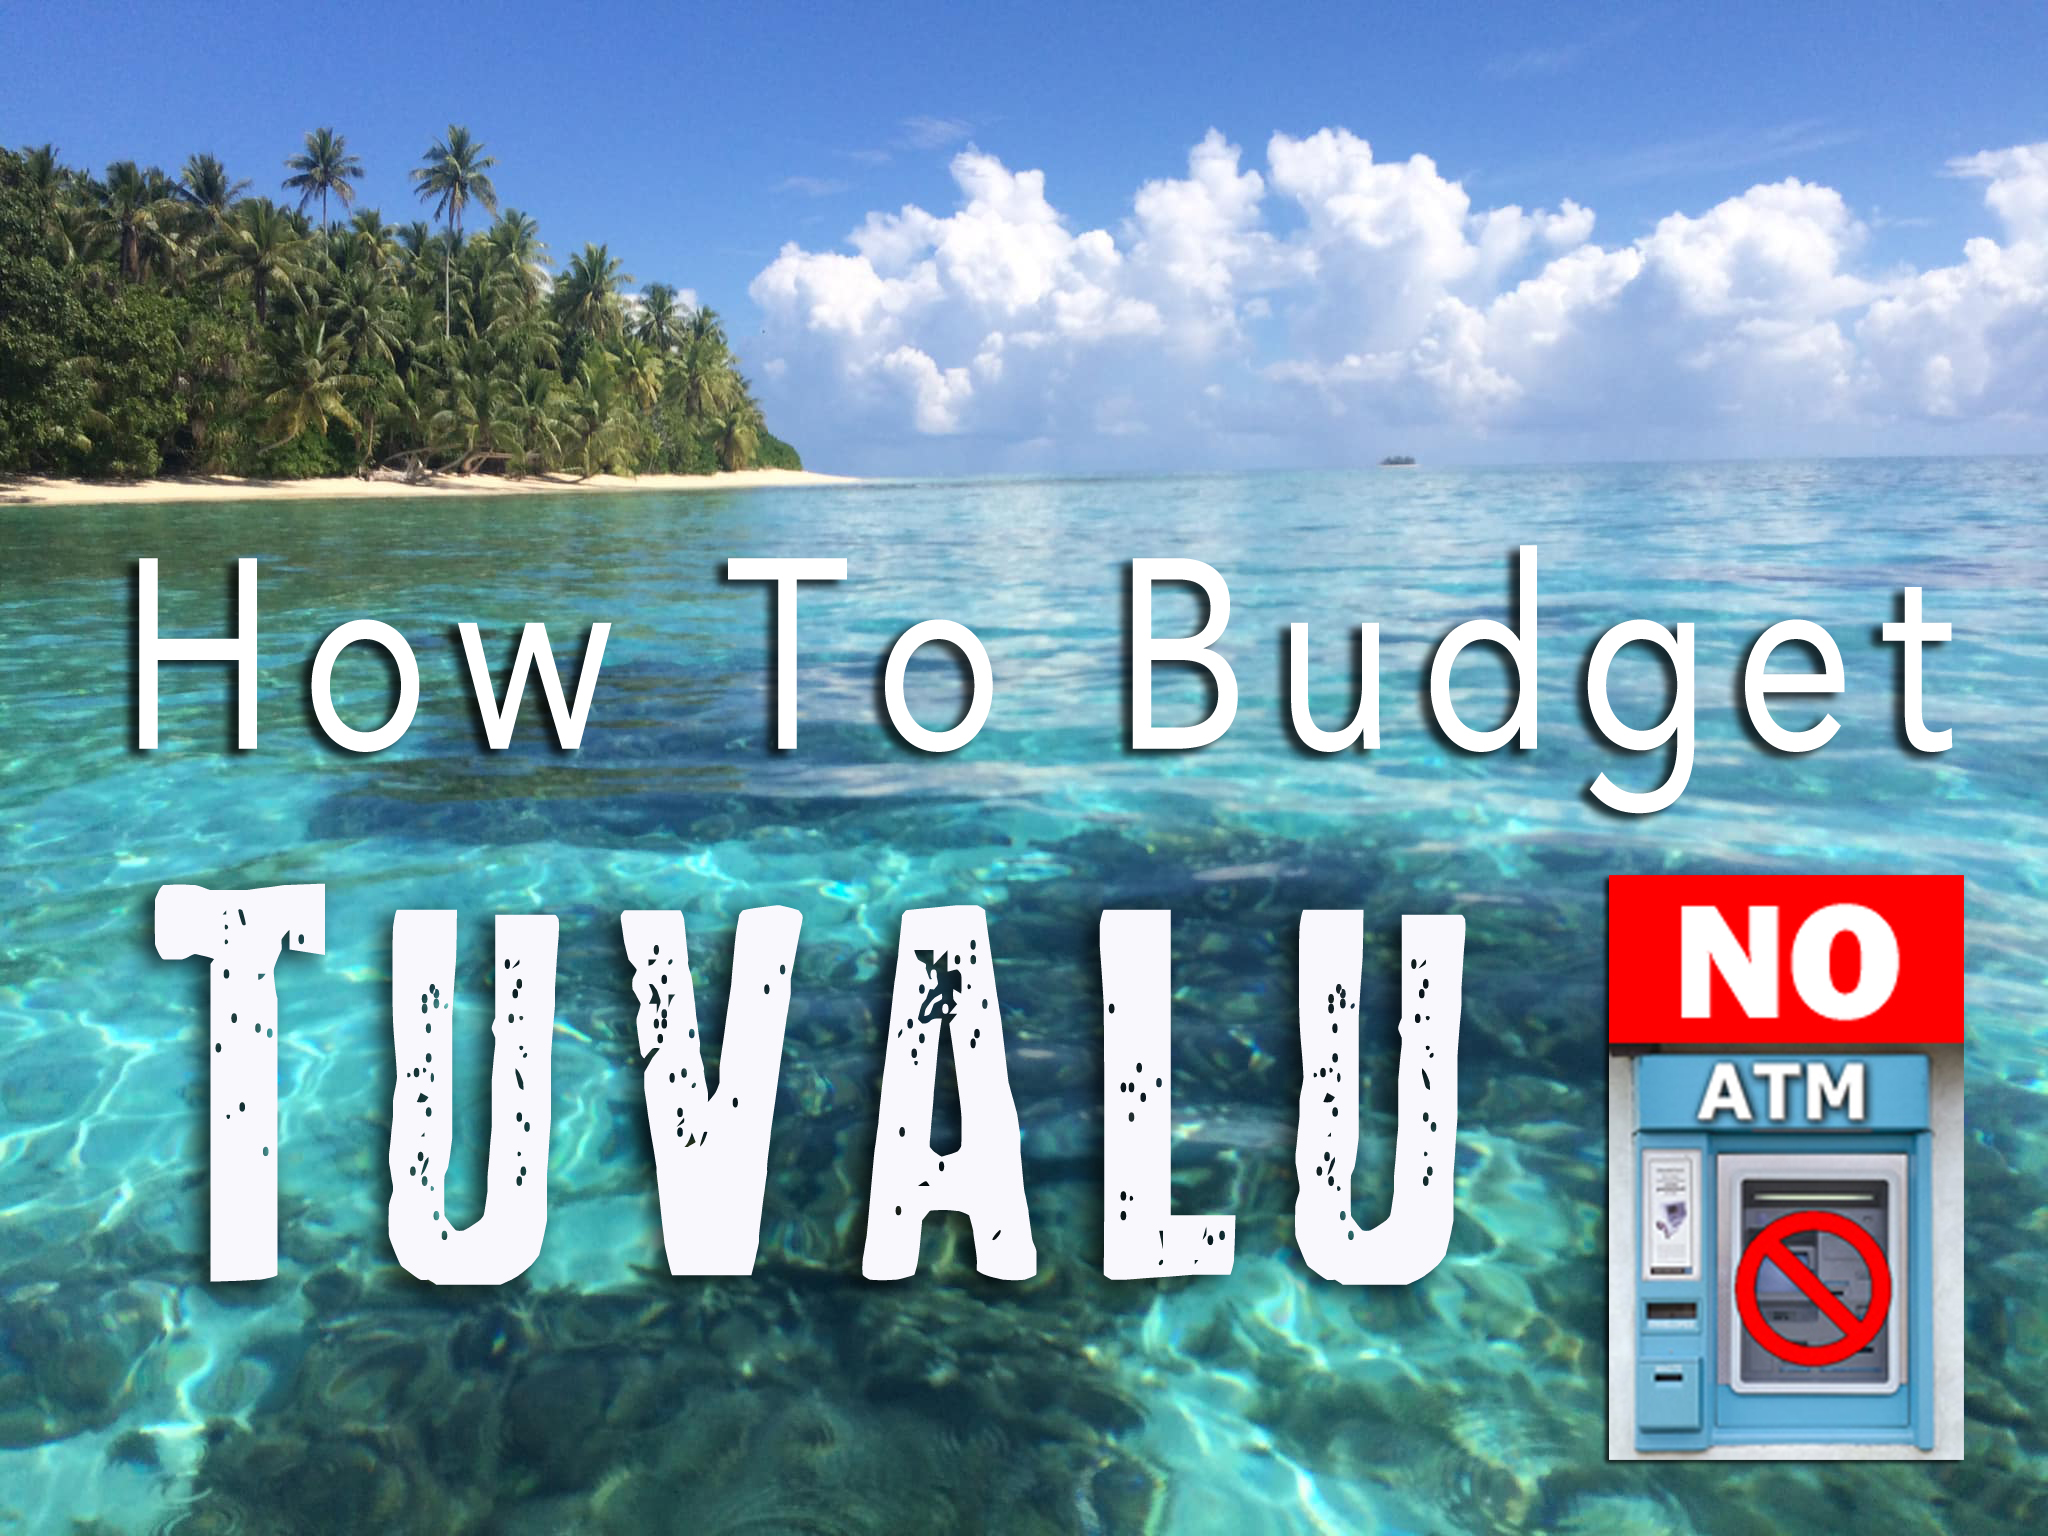 How Much Does It Cost To Visit Tuvalu?